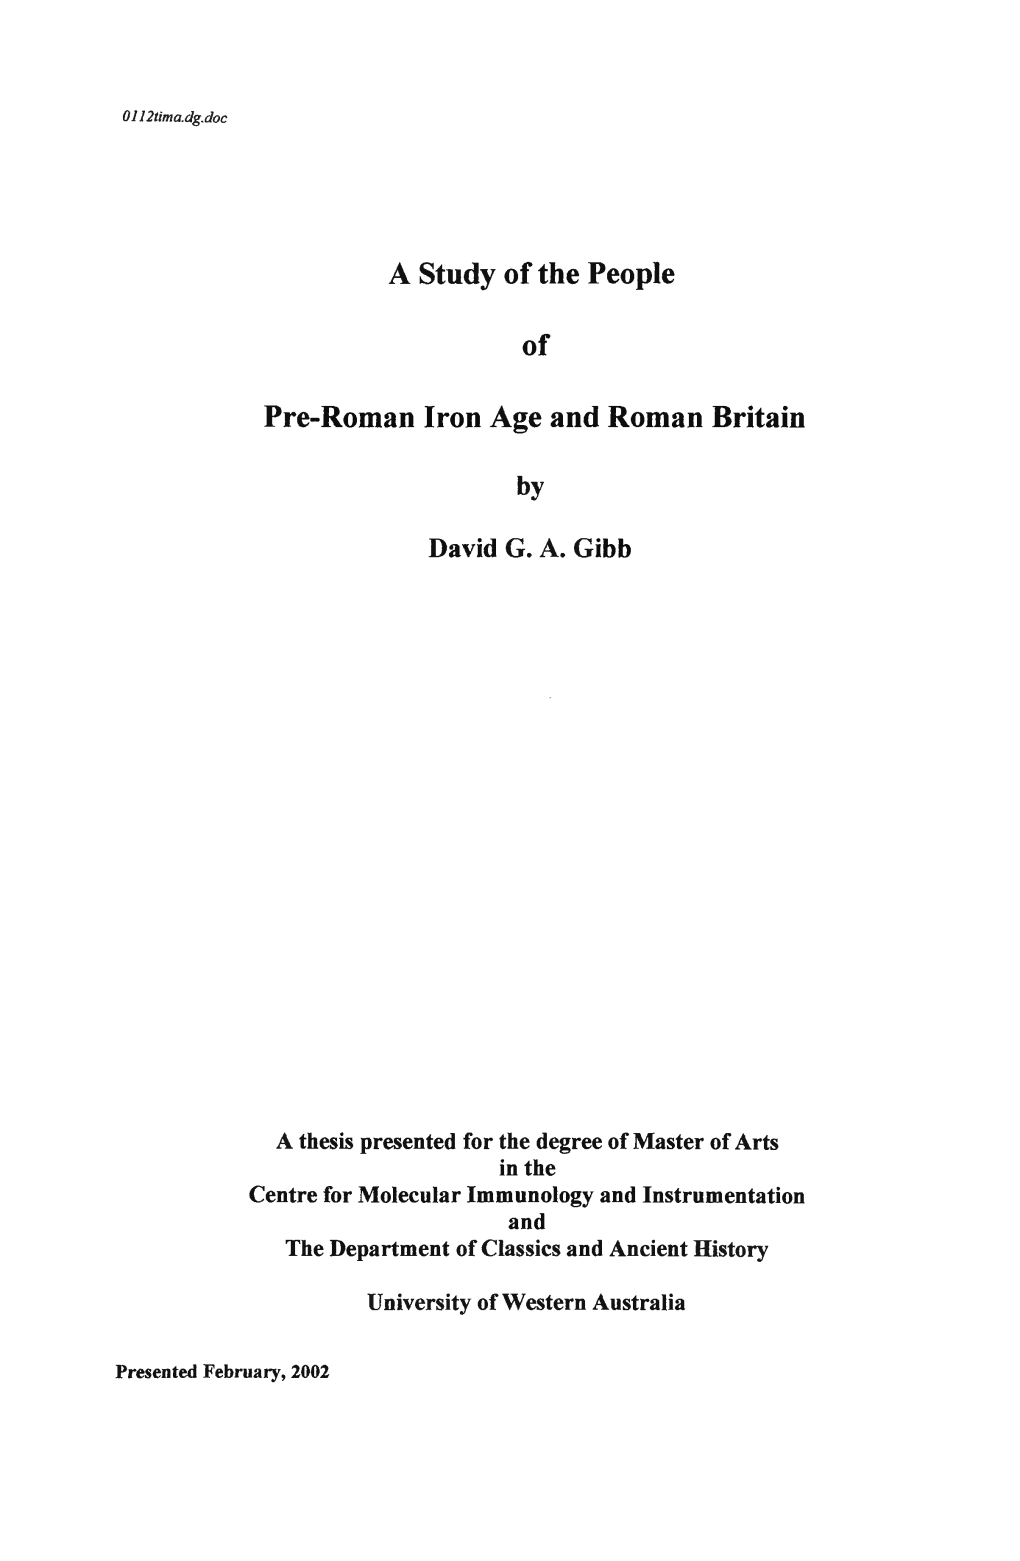 A Study of the People of Pre-Roman Iron Age and Roman Britain